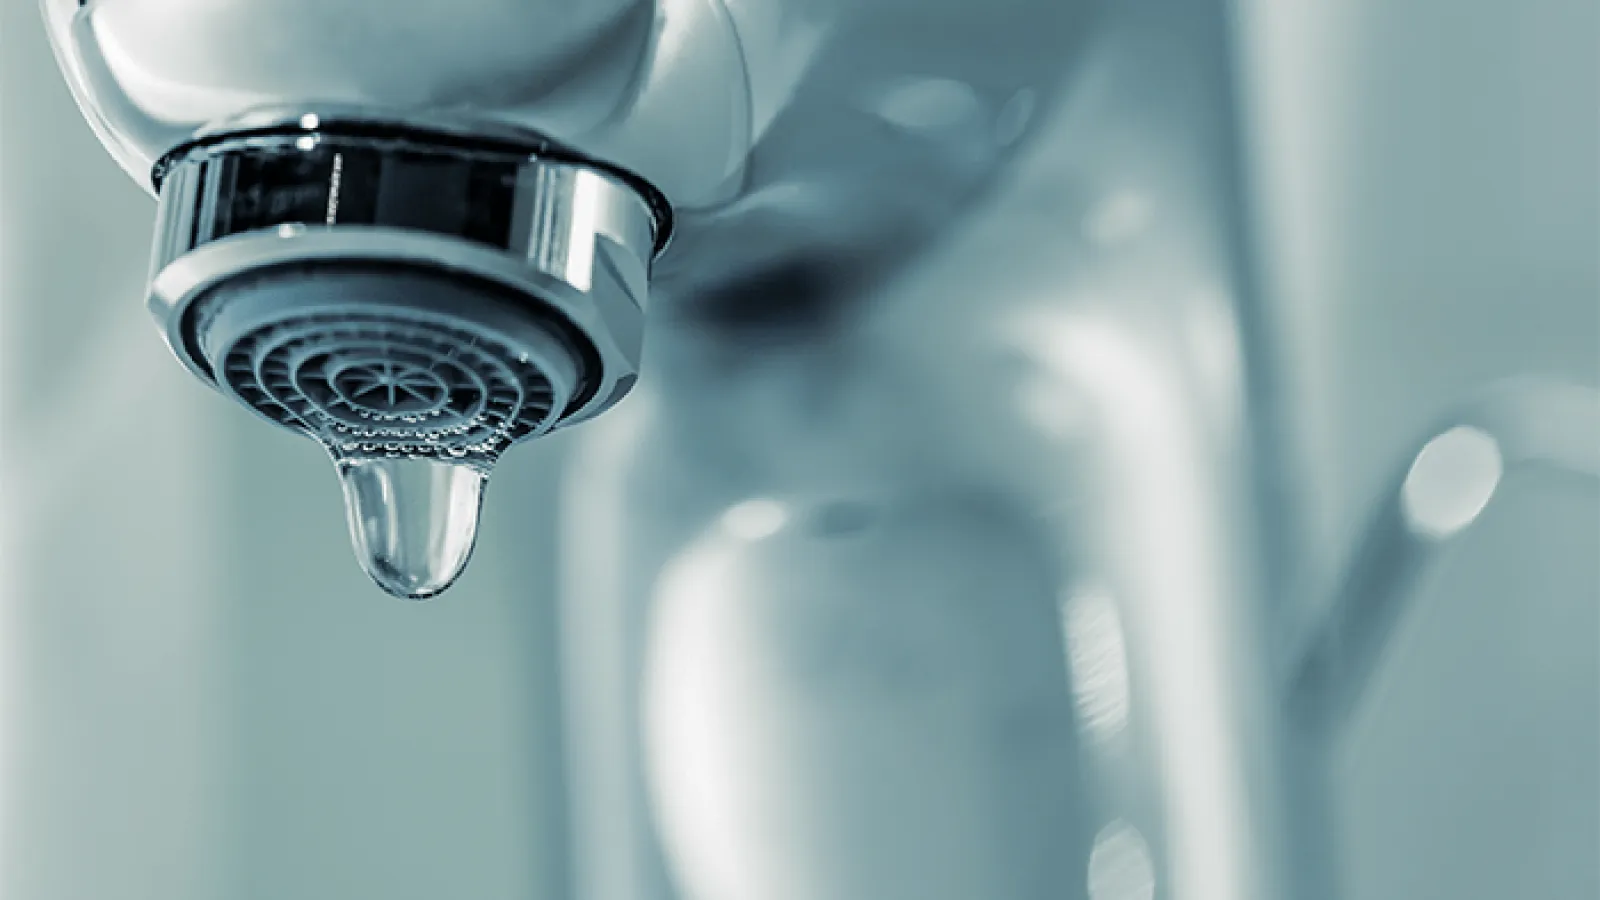 How Can I Save Water With Plumbing Fixtures?